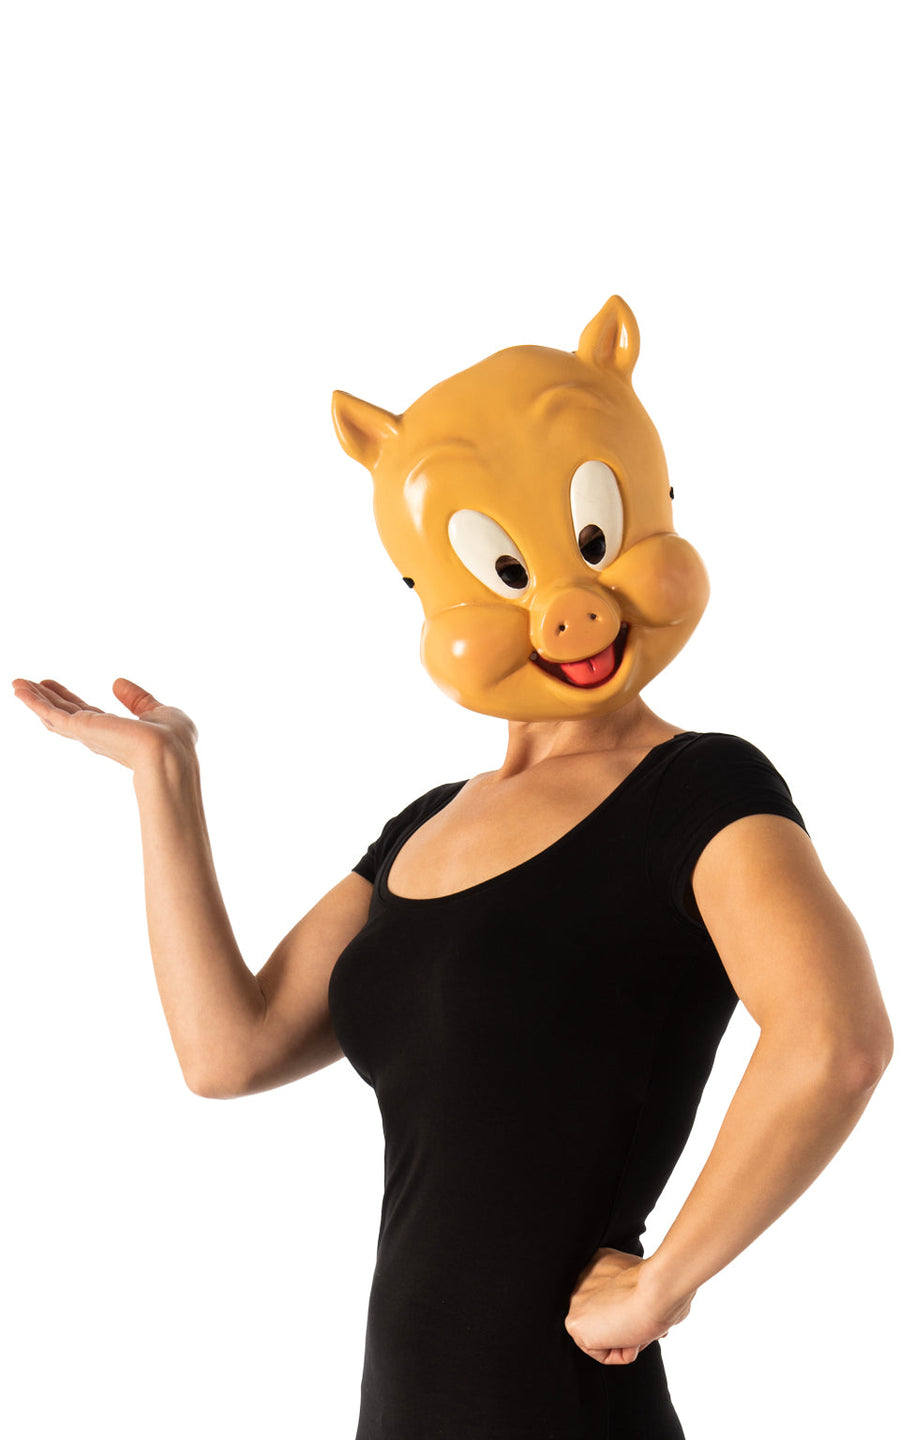 Porky Pig Mask From Space Jam 2_1